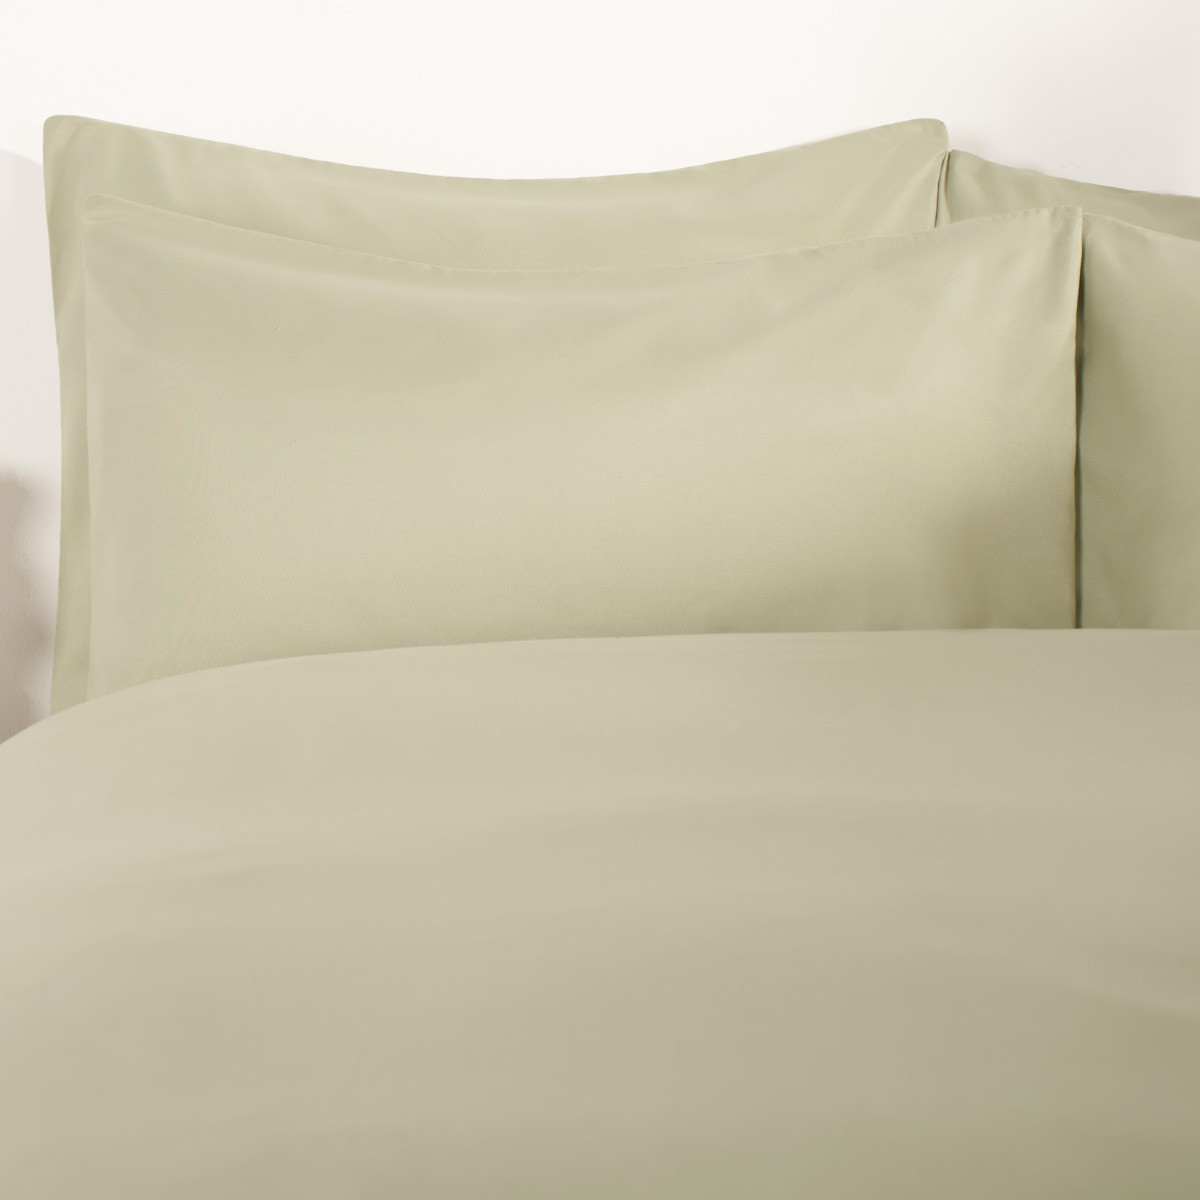 Brentfords 2 Pack Plain Dyed Housewife Pillowcases - Sage Green>